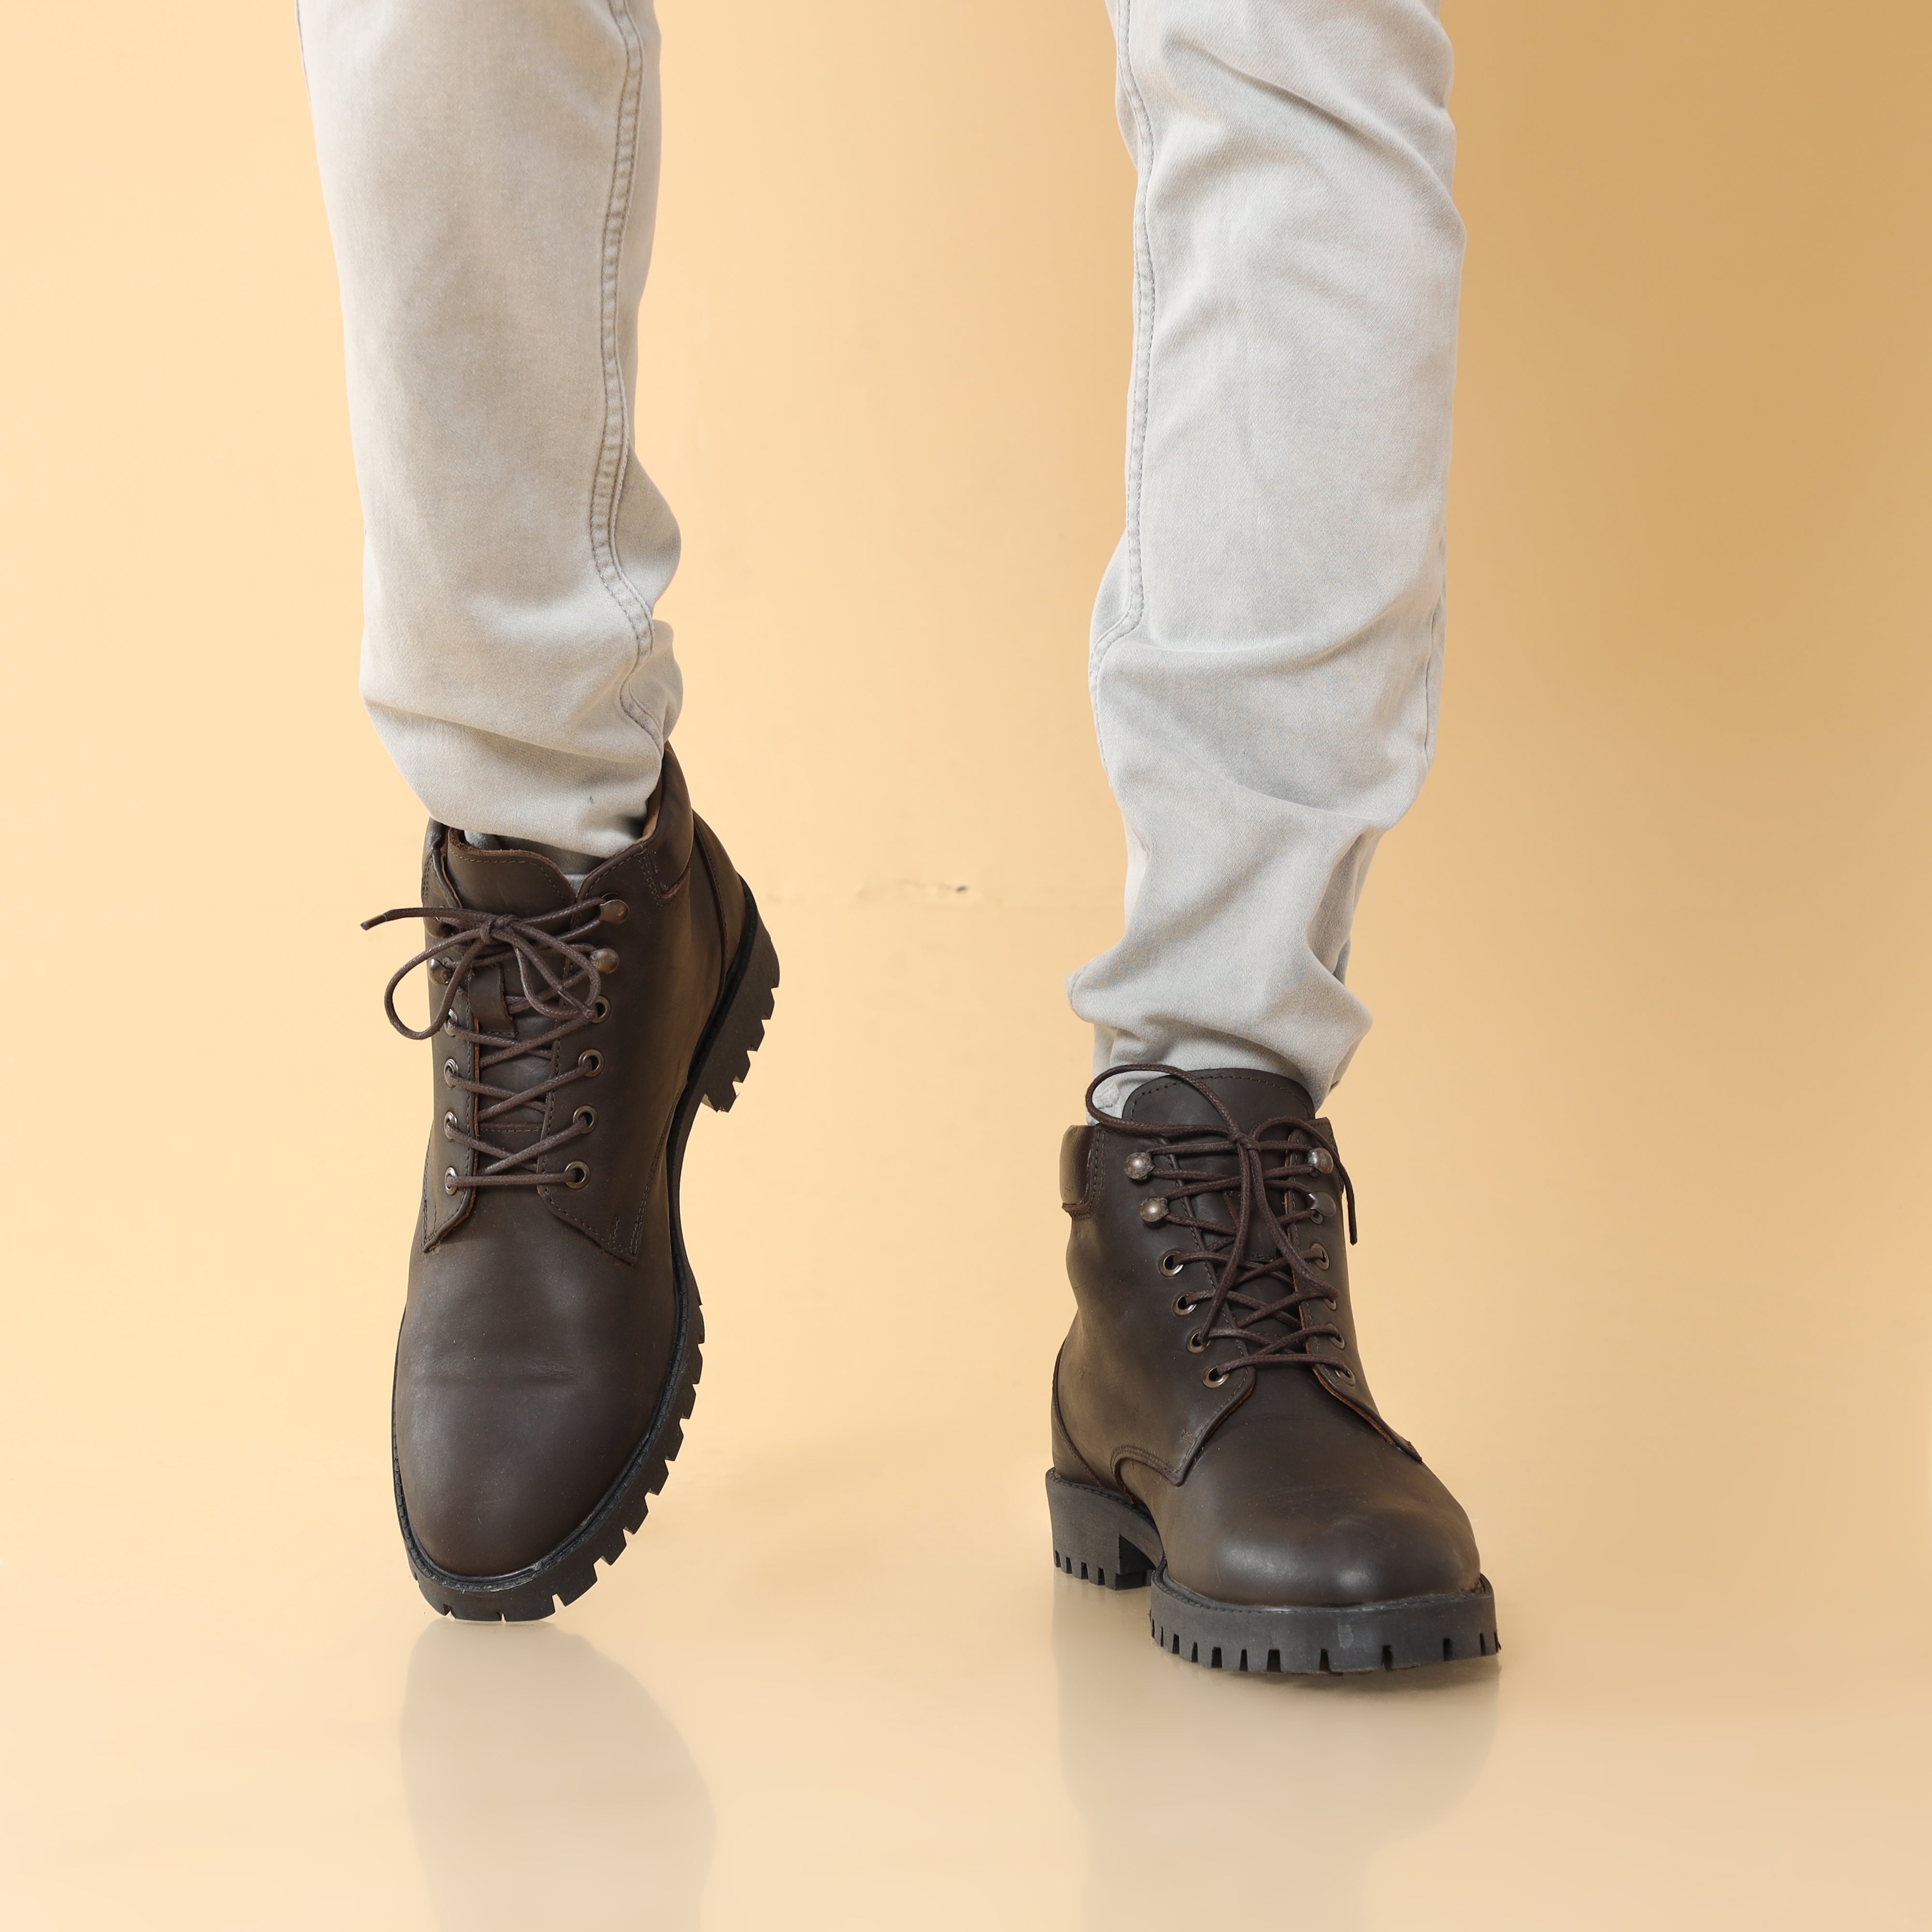 Classic men's leather boot with intricate stitching and robust construction